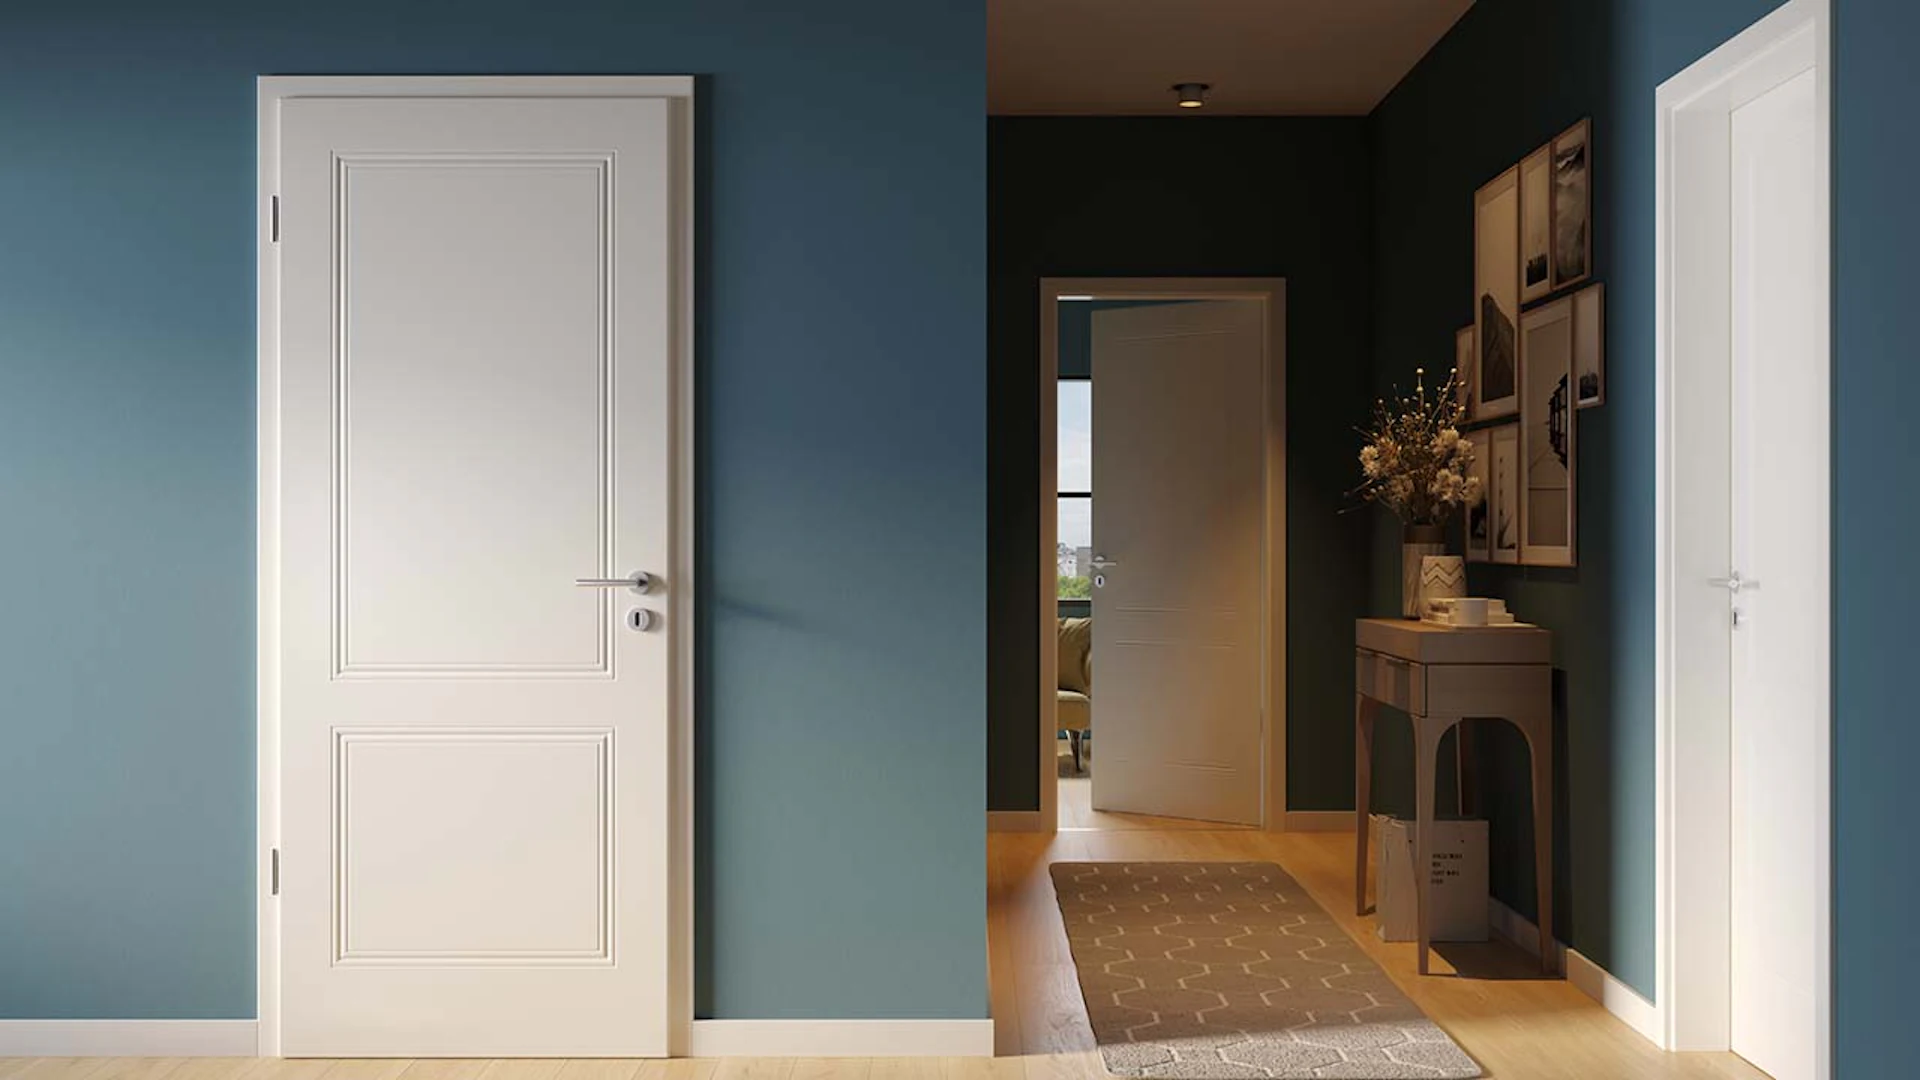 planeo interior door lacquer 2.0 - Aiko 9010 white lacquer 1985 x 860 mm DIN L - round RSP hinge 3-t